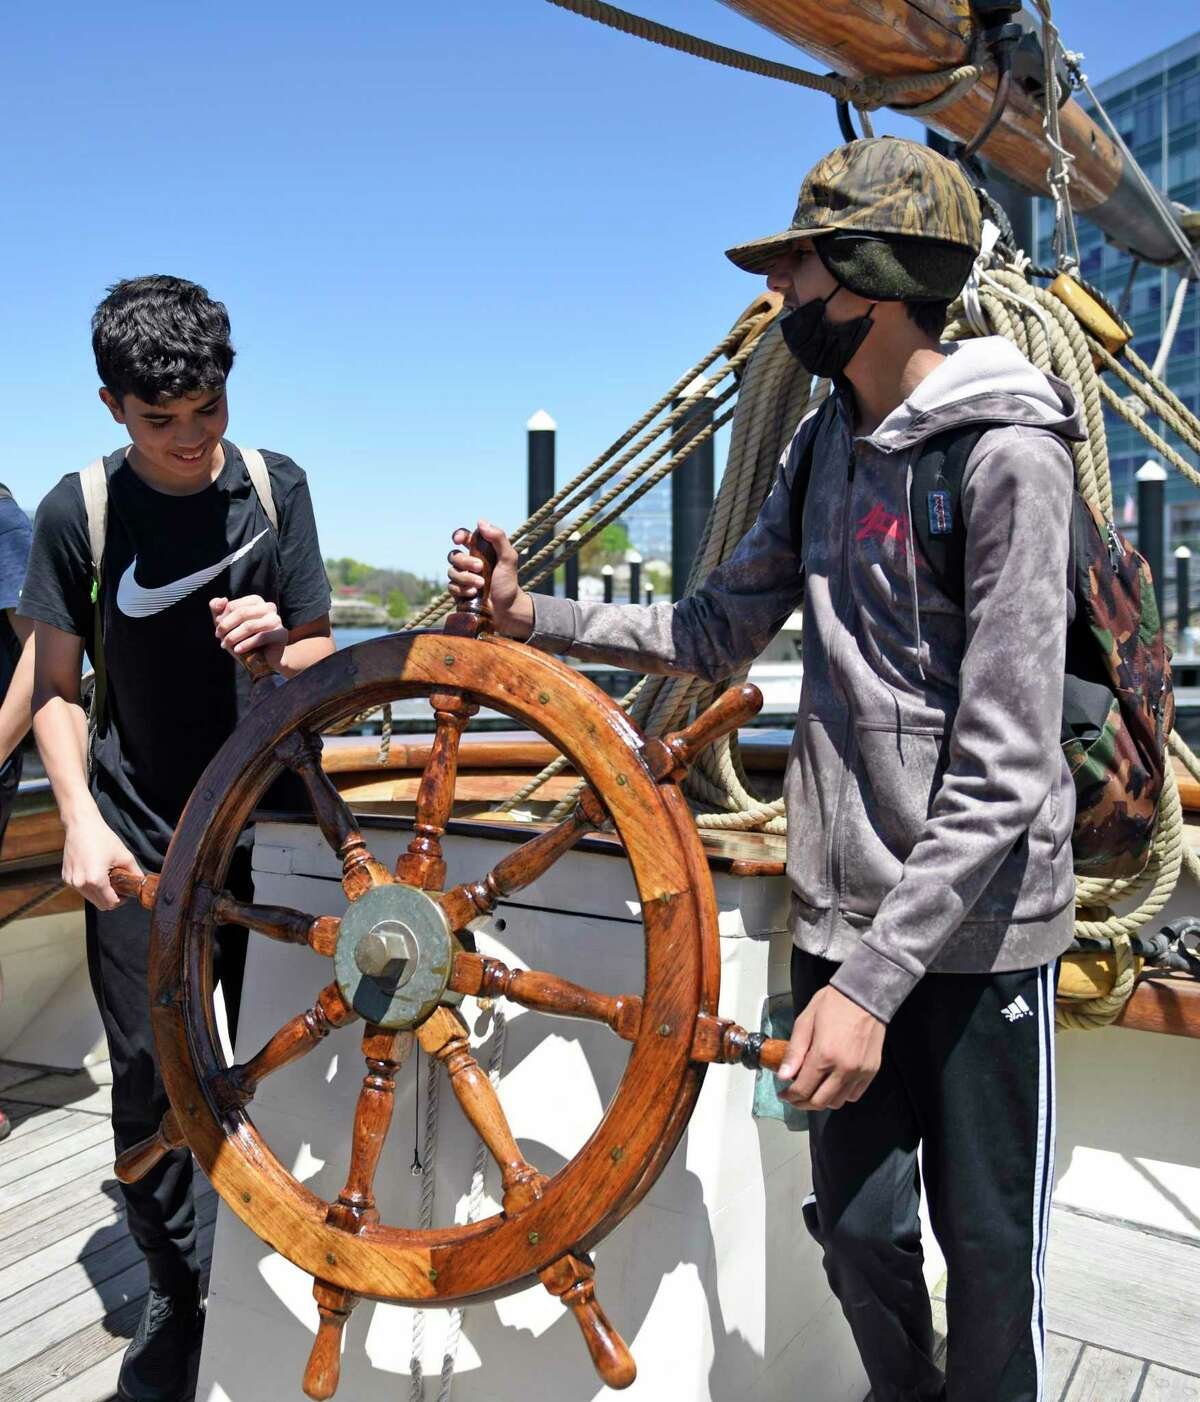  Eighth-graders Alejandro Guzman, left, and Arjun Manaise take the helm aboard a reproduction of the Amistad slave ship docked at Harbor Point in Stamford, Conn. Monday, May 9, 2022. Eighth grade students toured the ship to kick off the new partnersh